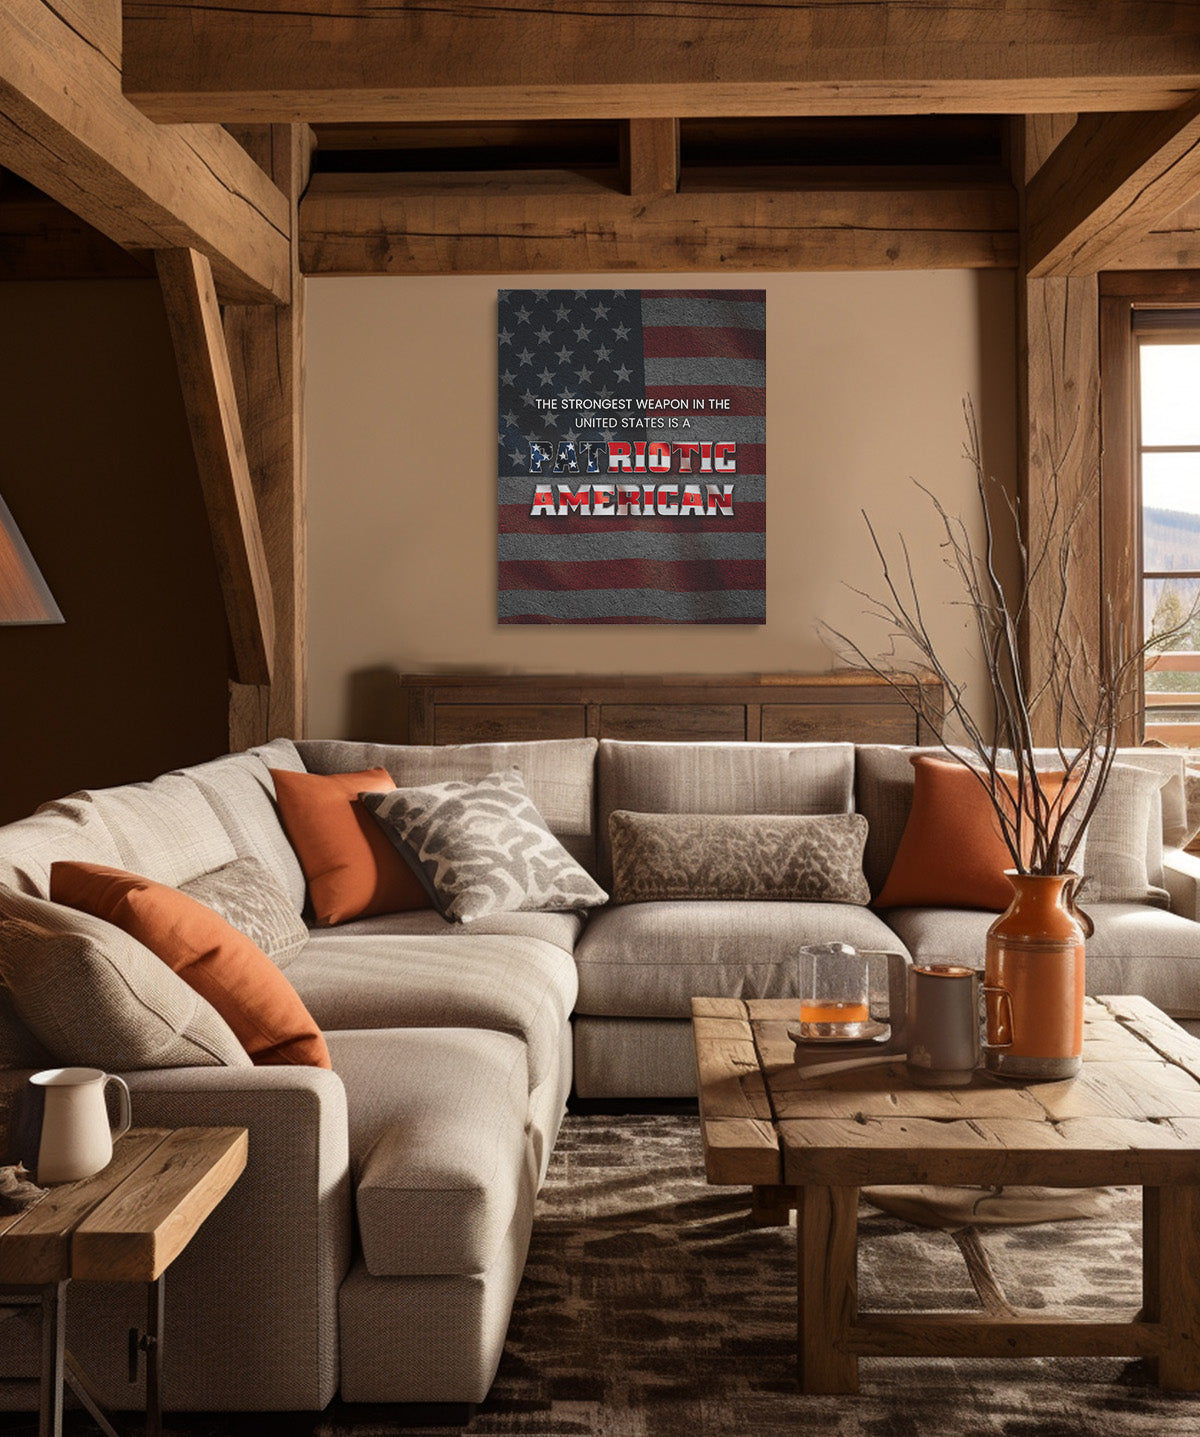 The Strongest Weapon - American Pride Wall Art - Patriotic Wall Decor